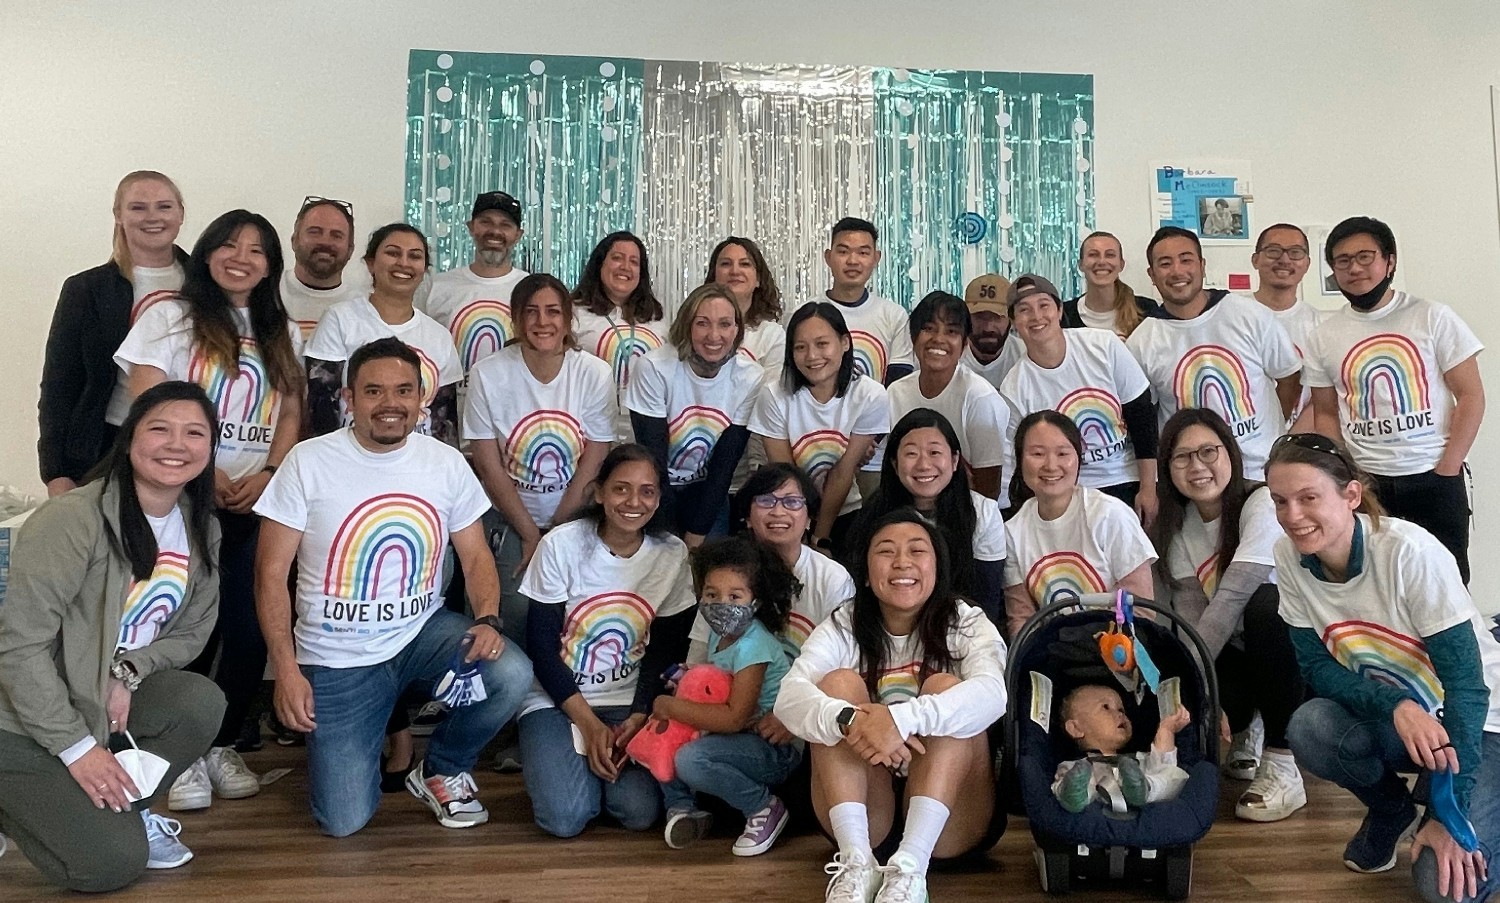 Employees getting together for our 2021 Senti Pride Walk to celebrate and show our support for the LGBTQ community.